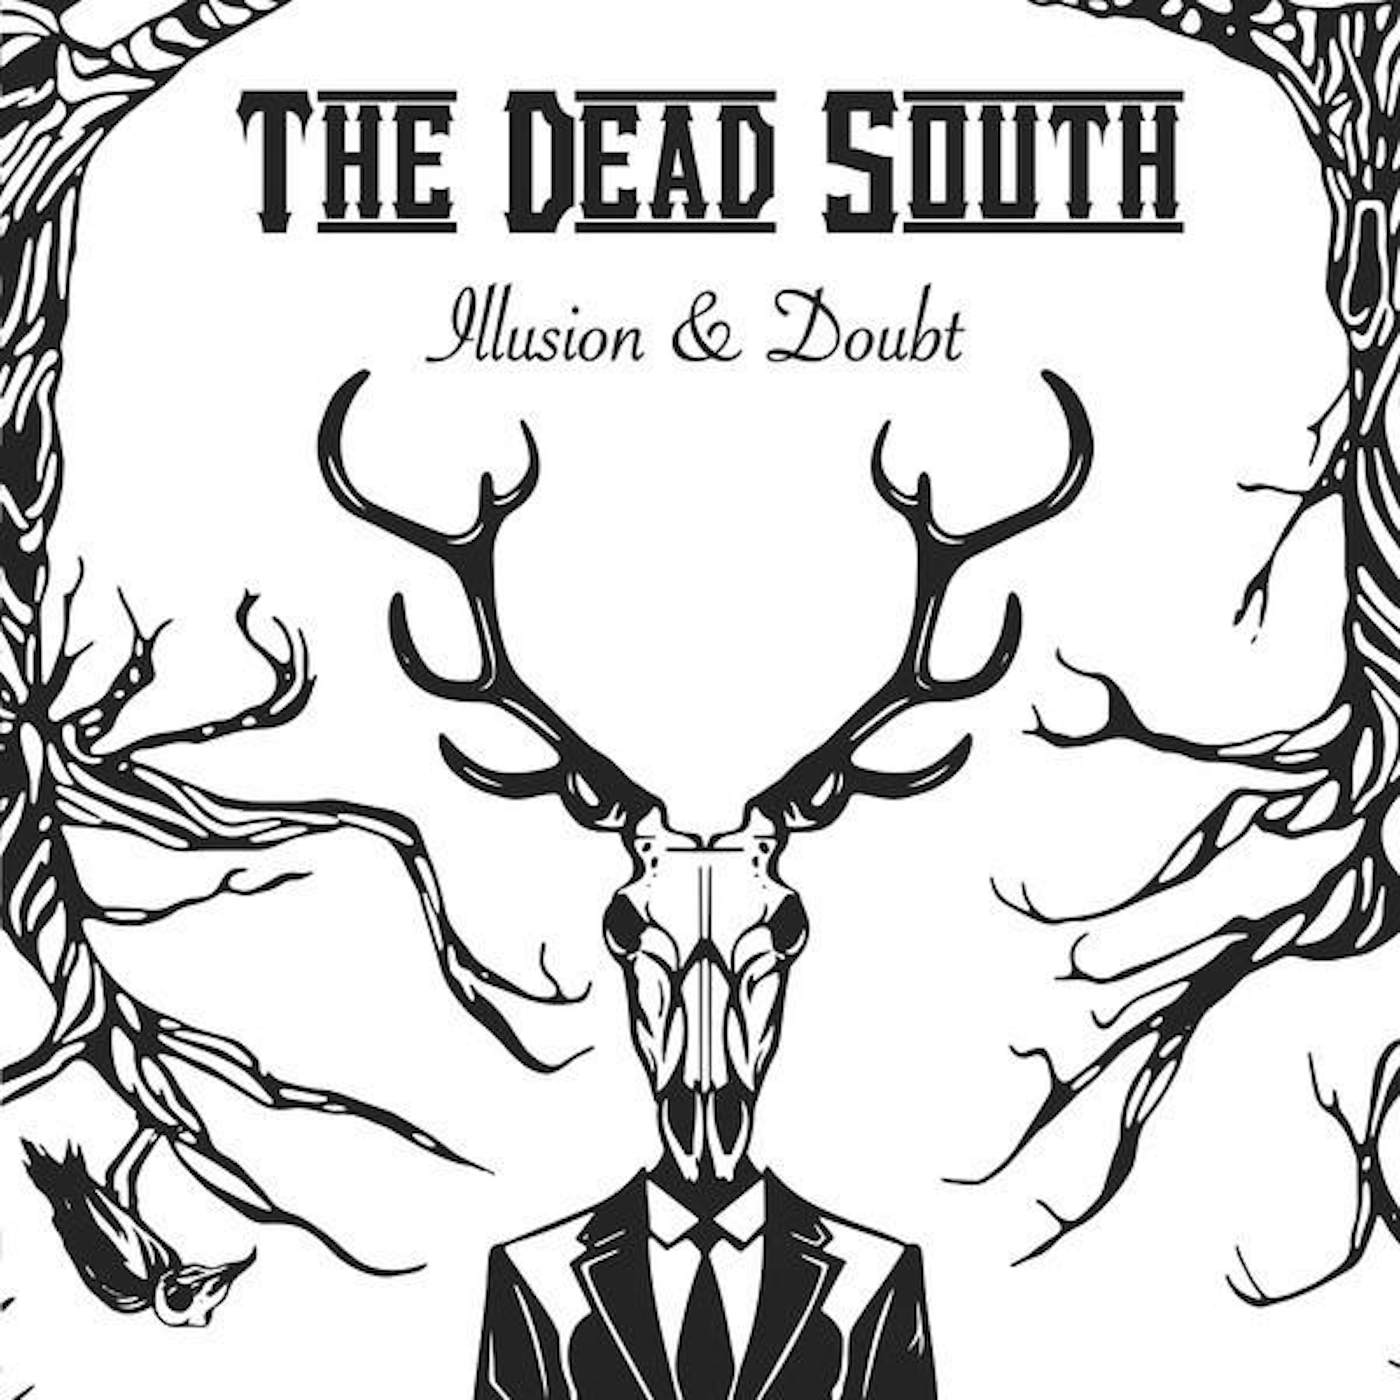 The Dead South ILLUSION & DOUBT Vinyl Record